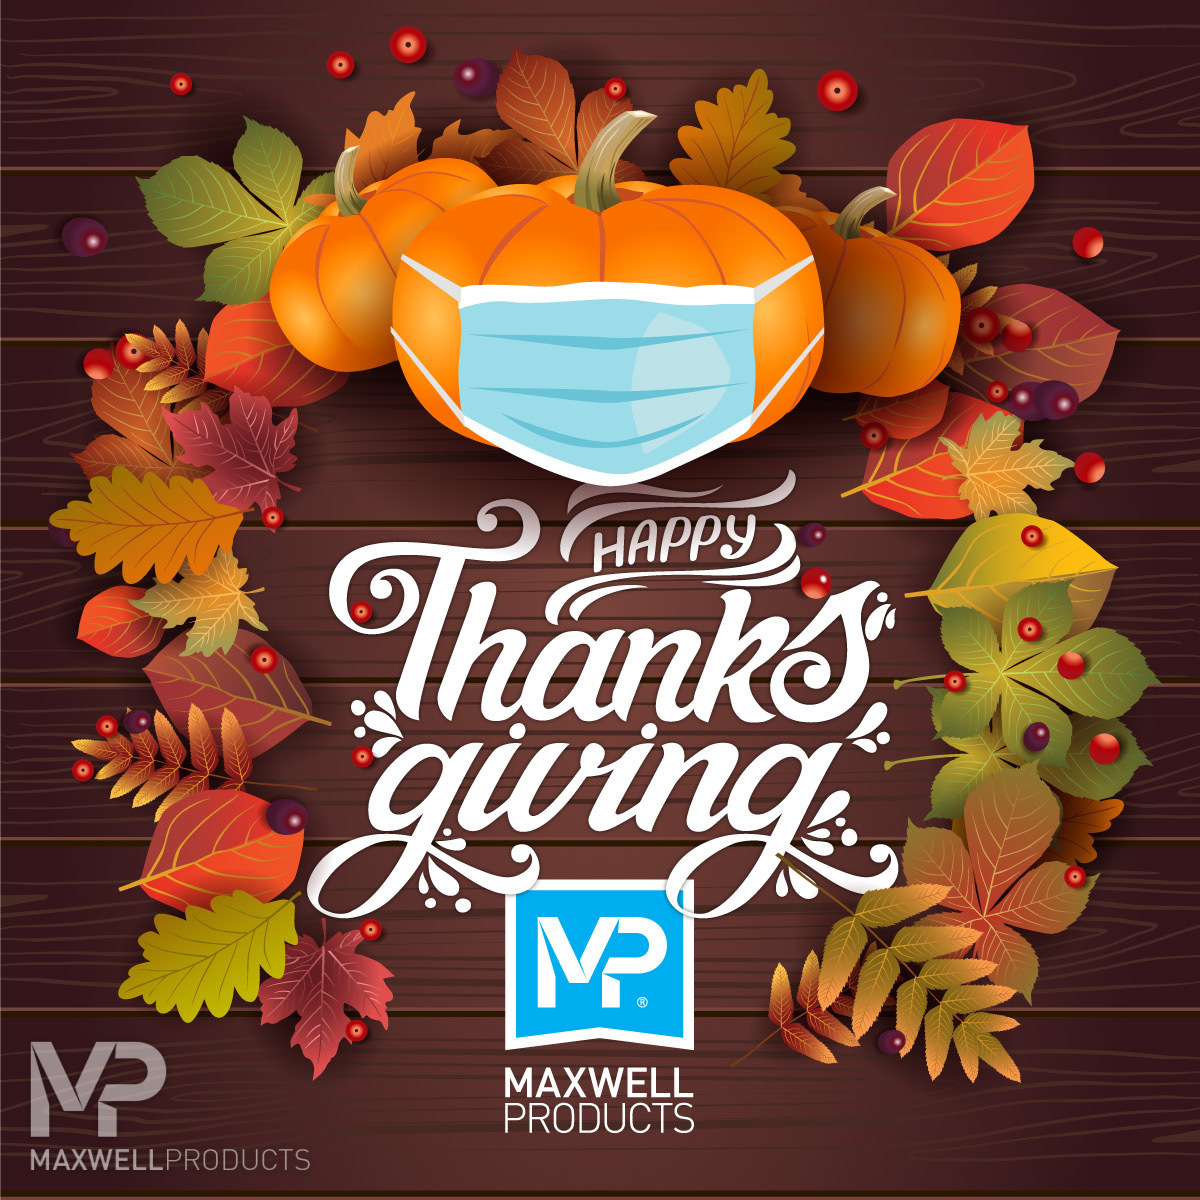 Happy Thanksgiving from Maxwell Products